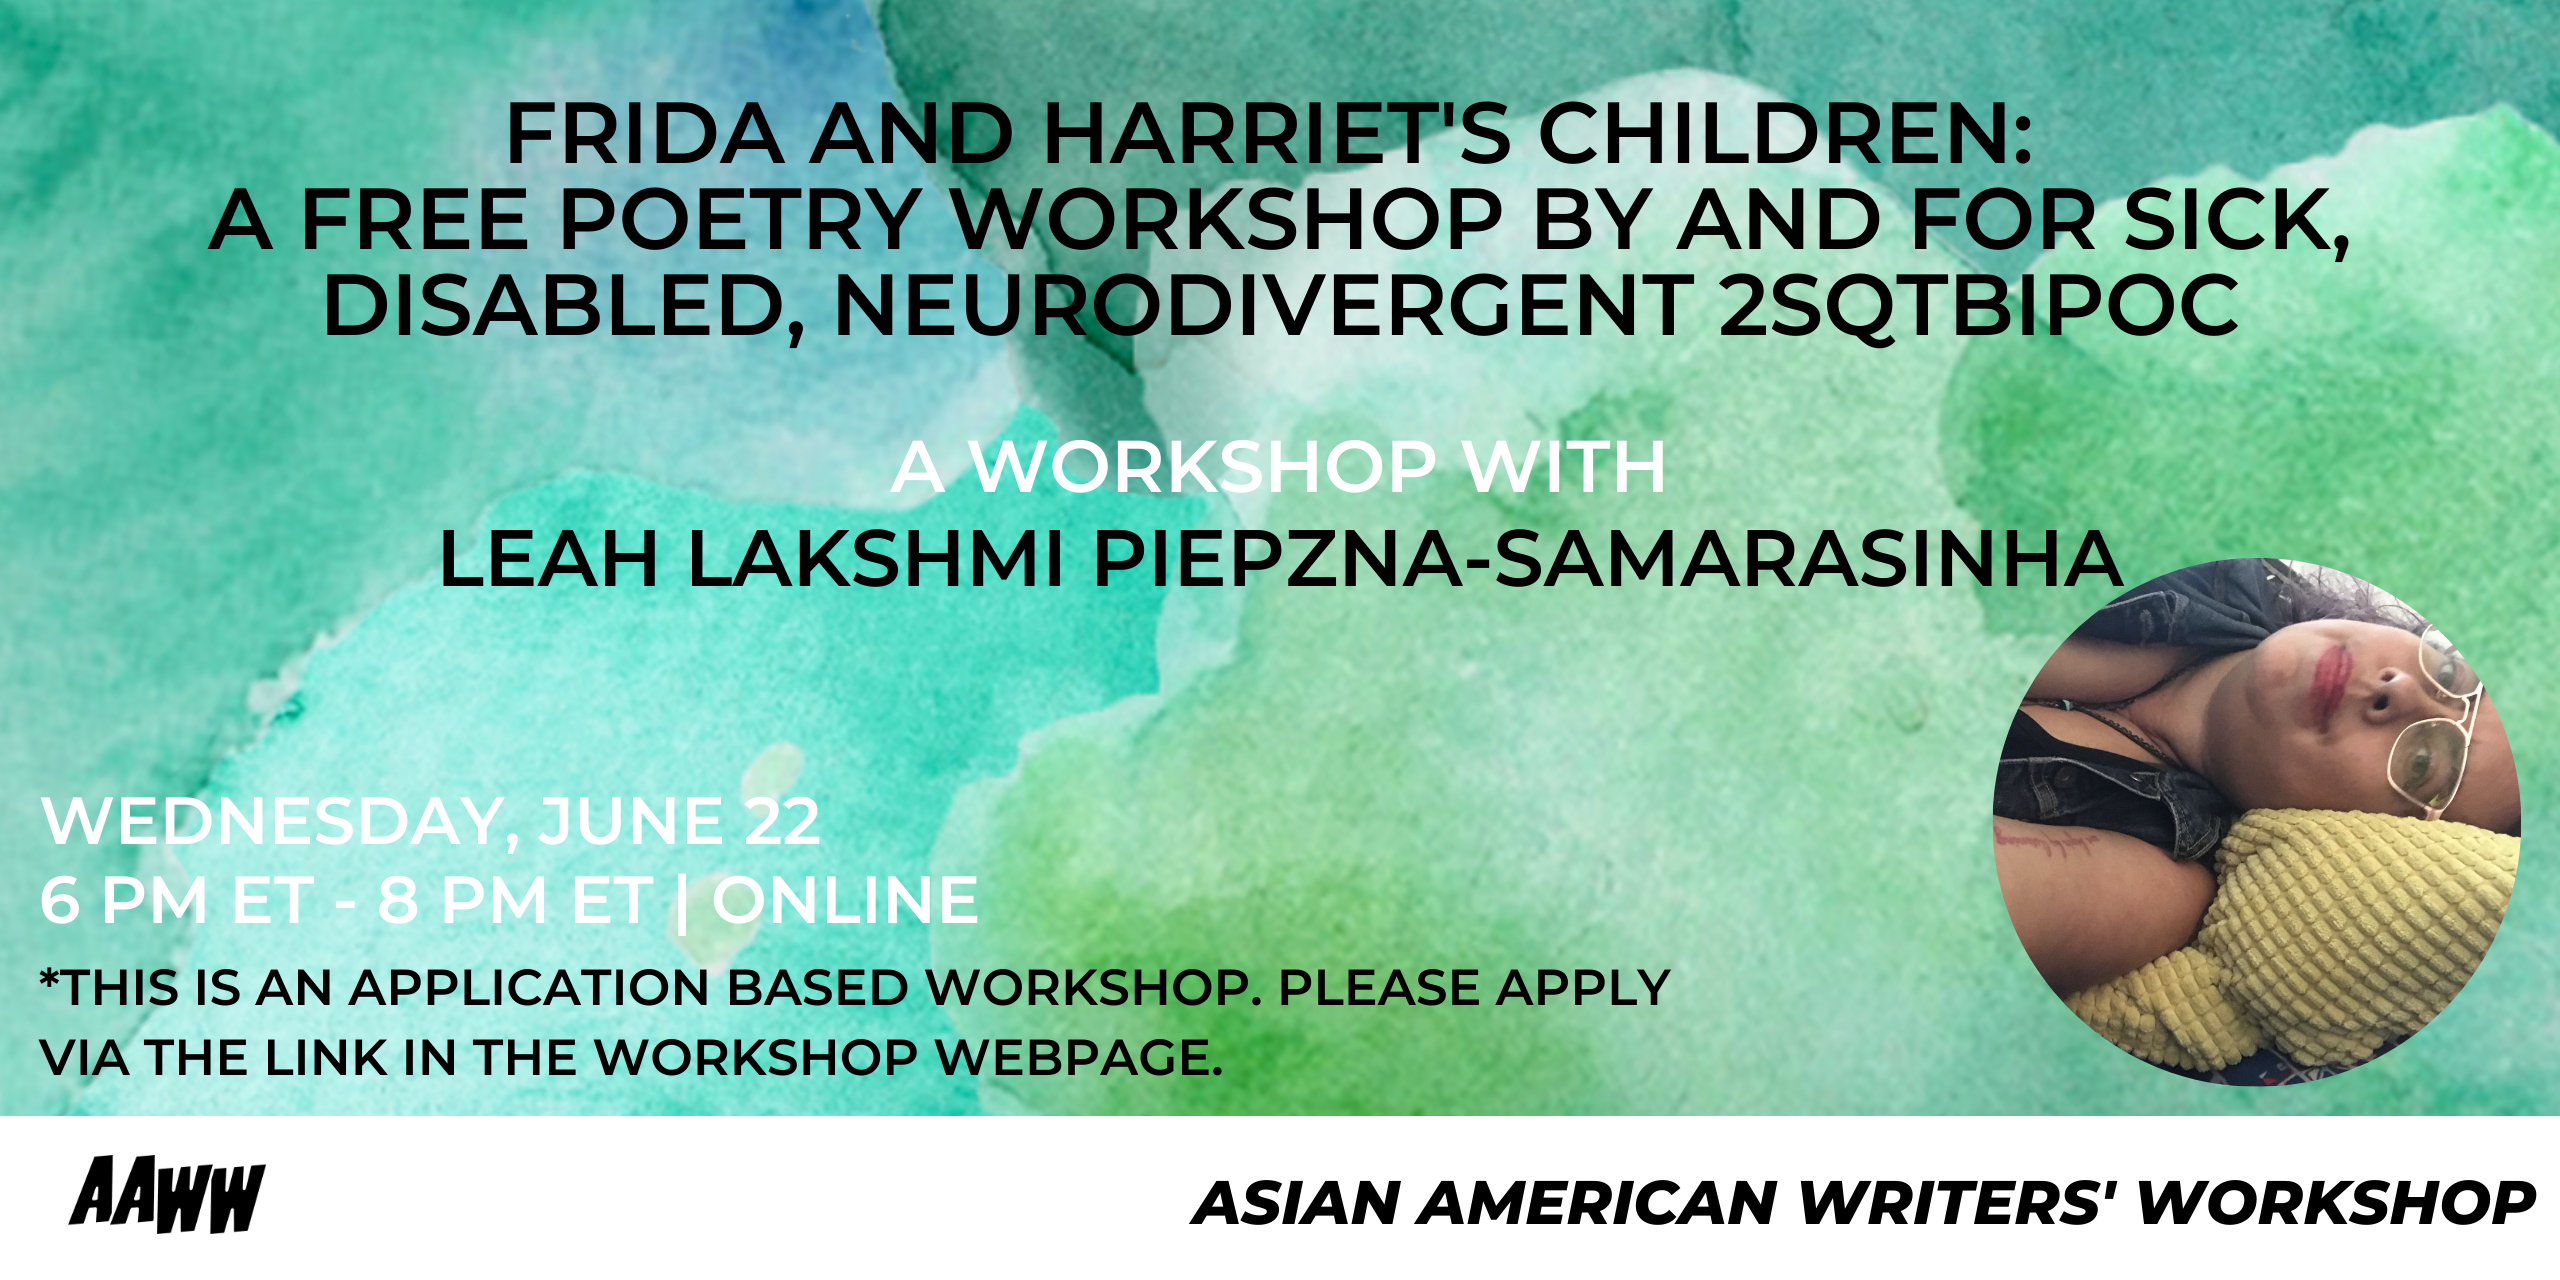 [VIRTUAL] WORKSHOP: Frida and Harriet's Children: A Free Poetry Workshop by and for Sick, Disabled, Deaf and Neurodivergent 2SQTBIPOC